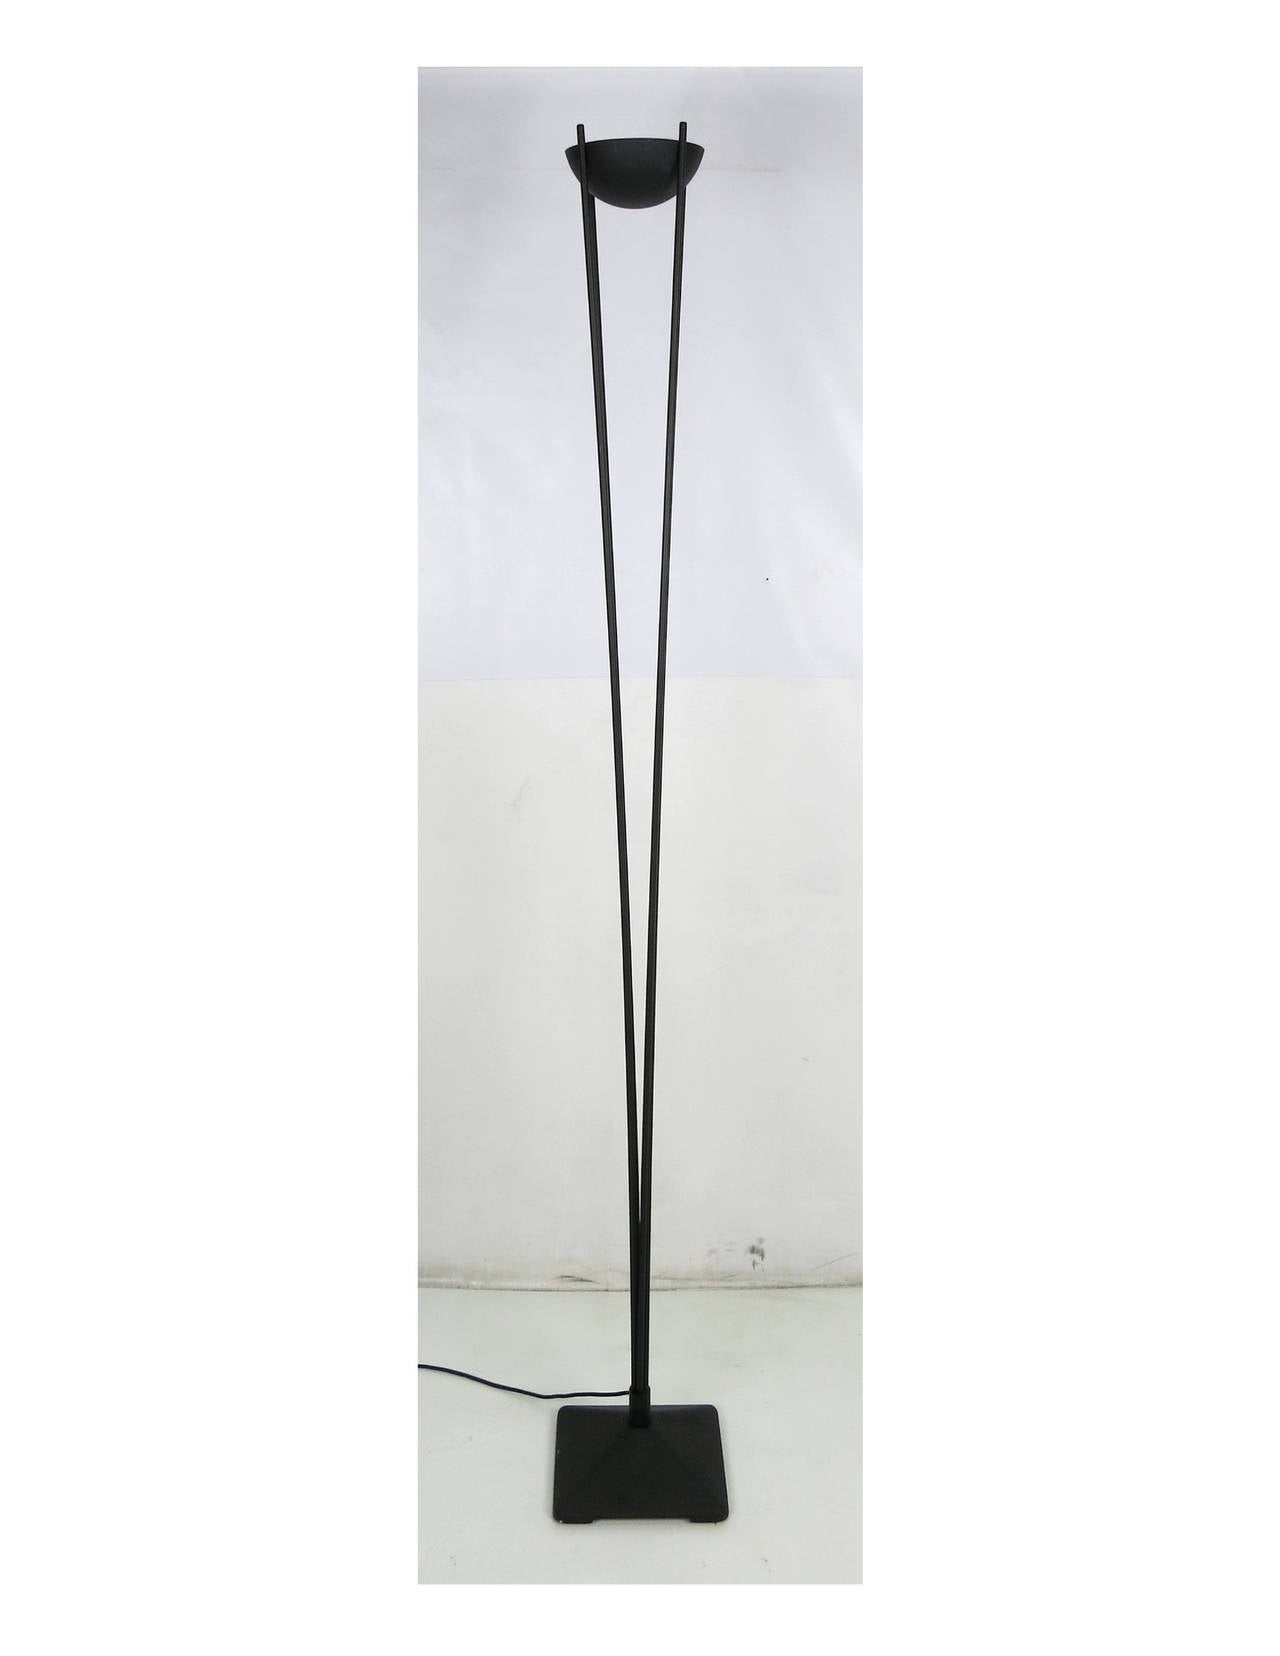 Pair of Classic modern torchieres with a half spherical shade supporting by four flaring supports. The dimmer/floor switch controls a 100W halogen bulb. 

Dimensions-
Base- 10